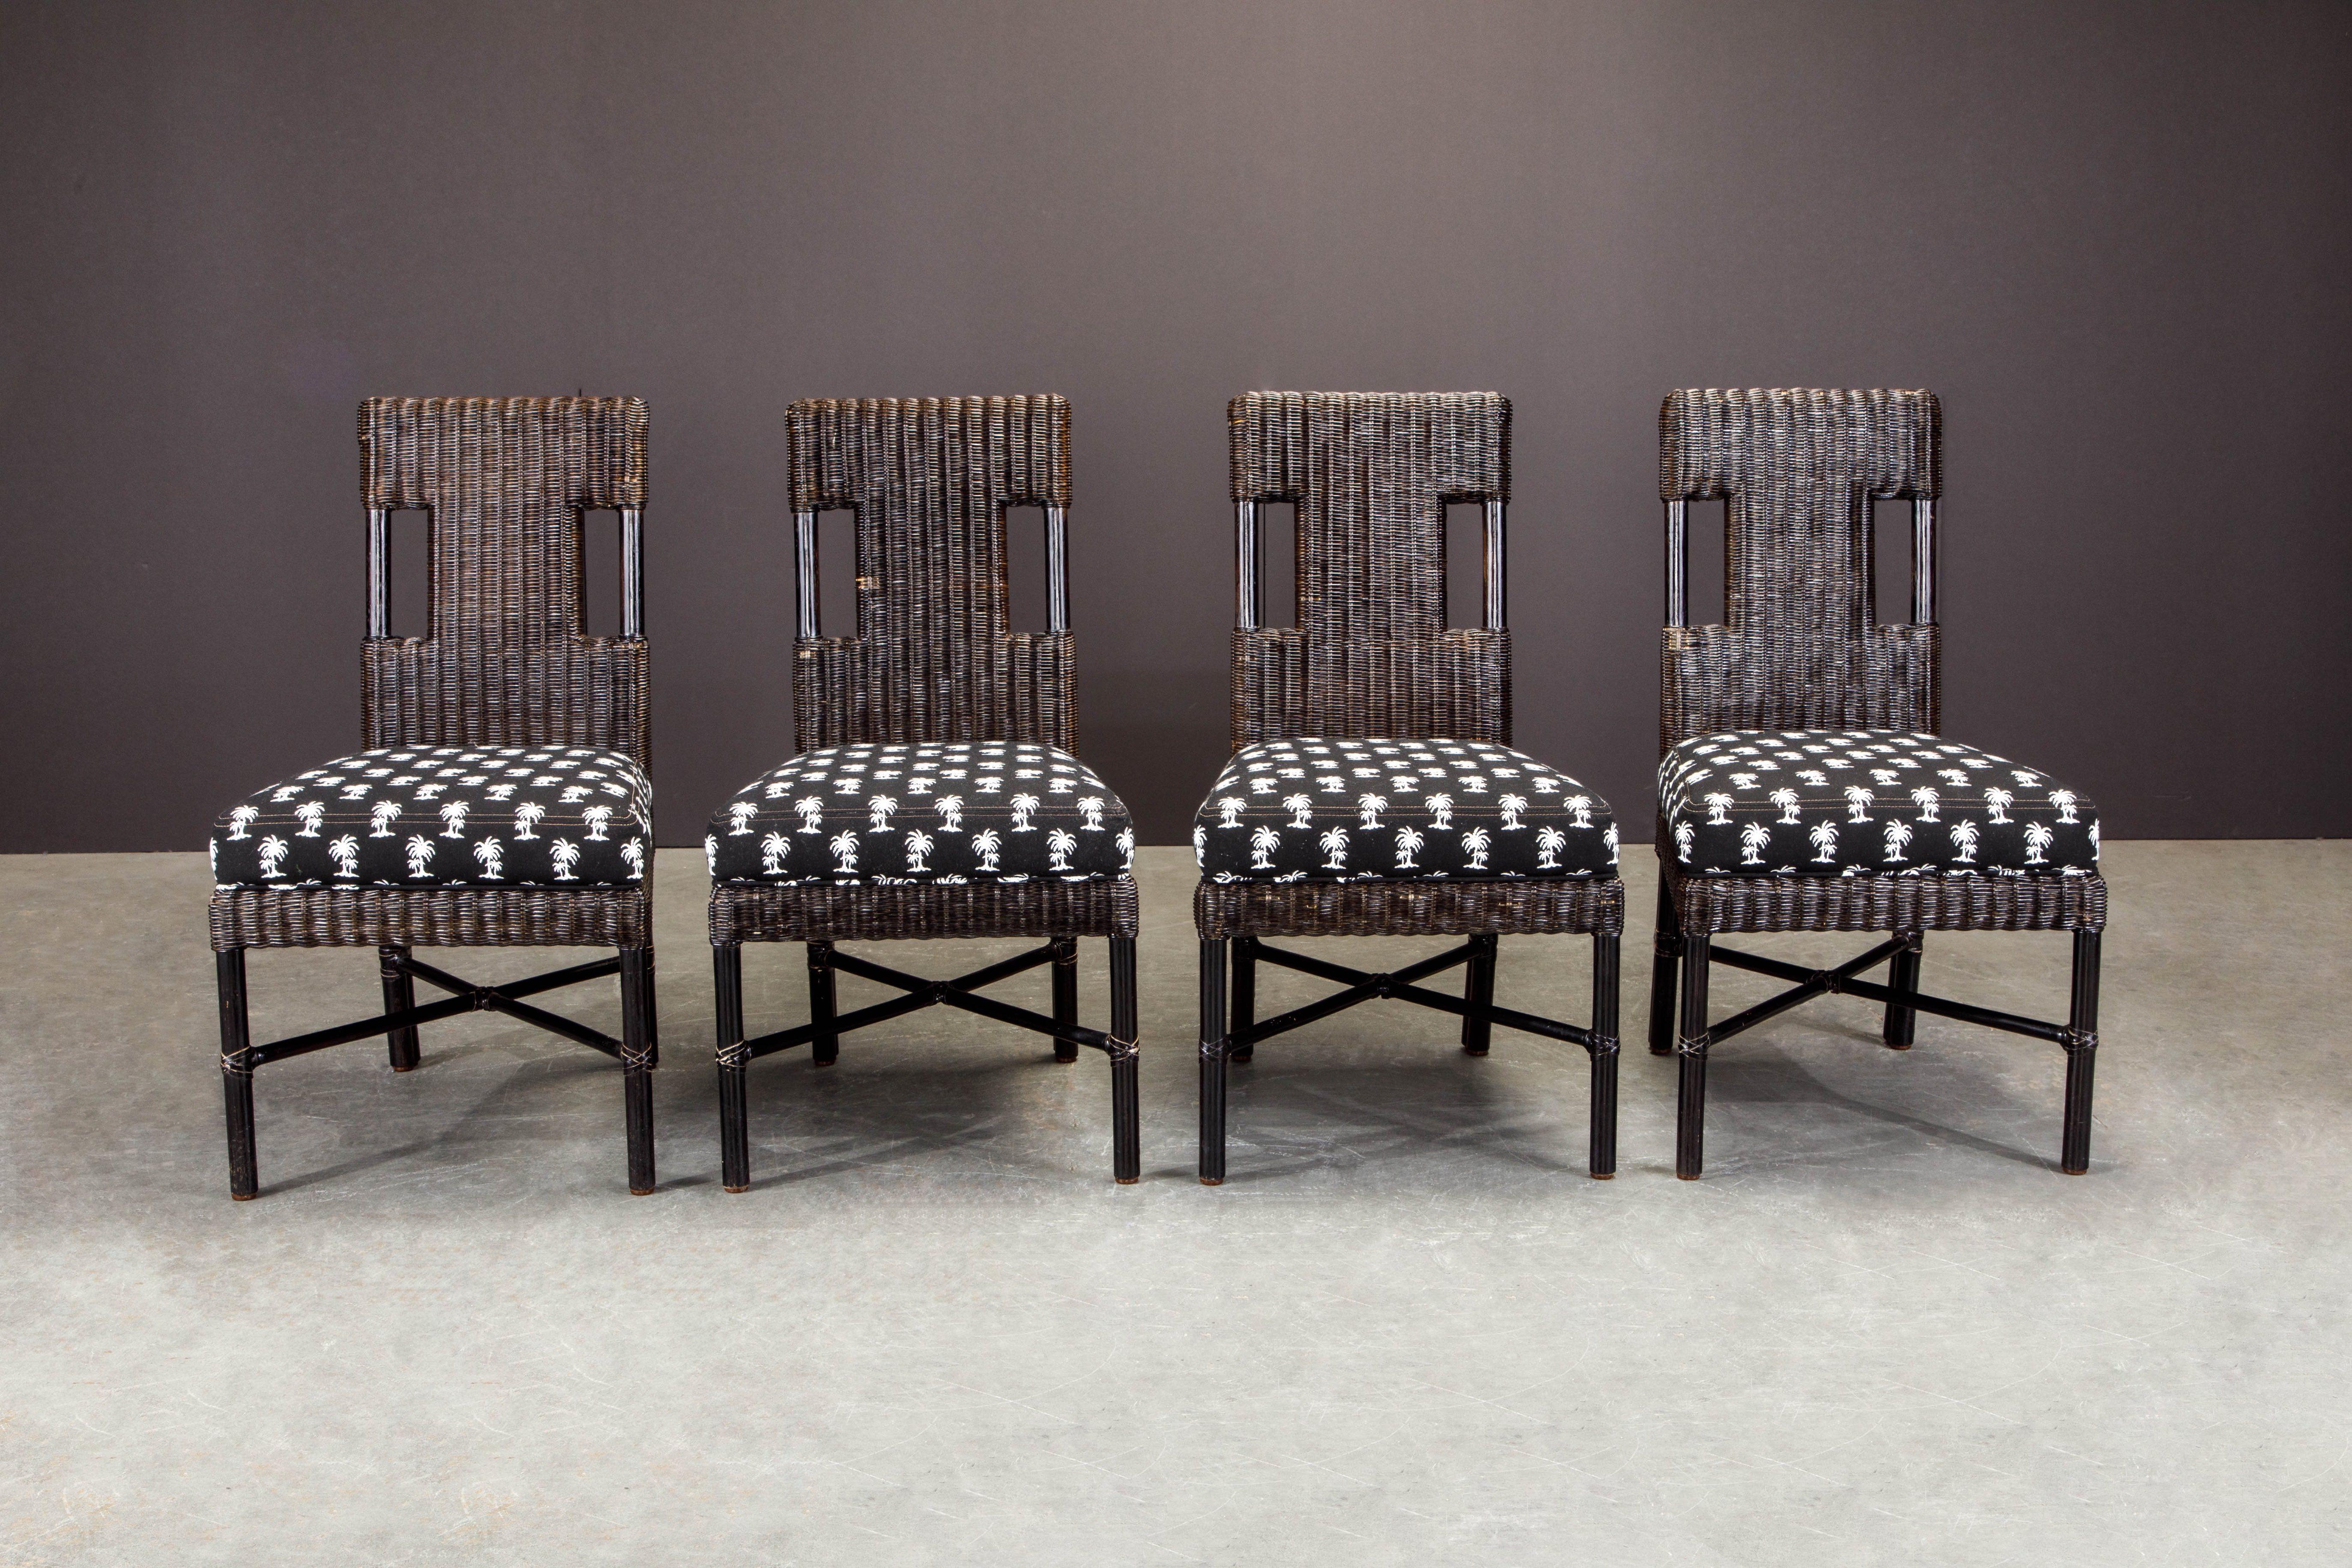 An elegant set of four (4) wicker McGuire cafe chairs (signed) that can be used indoor or out. Fabricated from woven wicker that has been finished in a black color with palm tree decorated fabric seats giving a tropical touch. Under the seat the